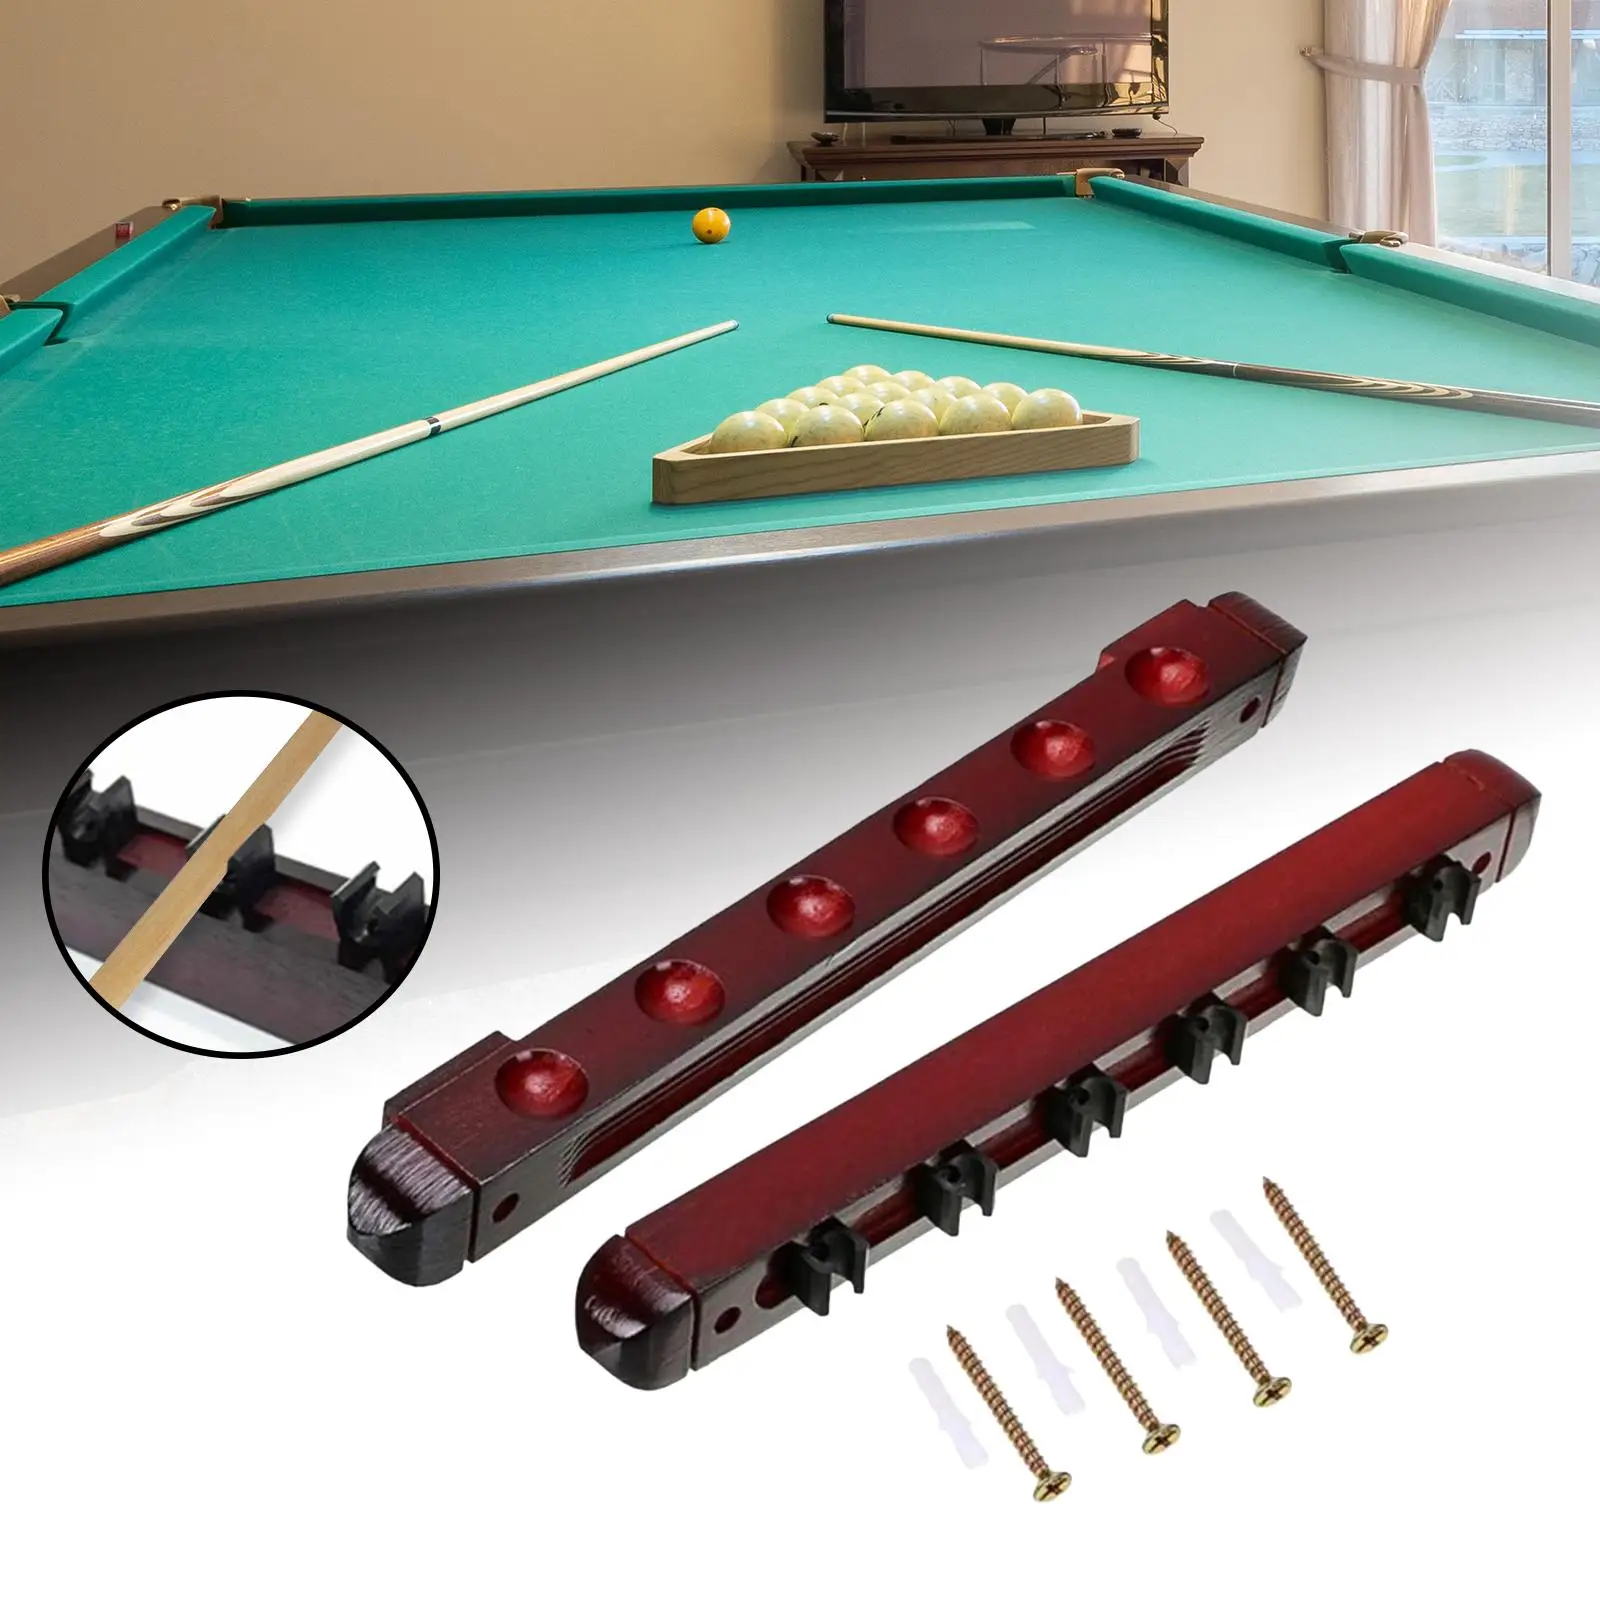 Billiard Cue Clips Rack Wall Mounted Pool Stick Holder Wooden Game Room Bars